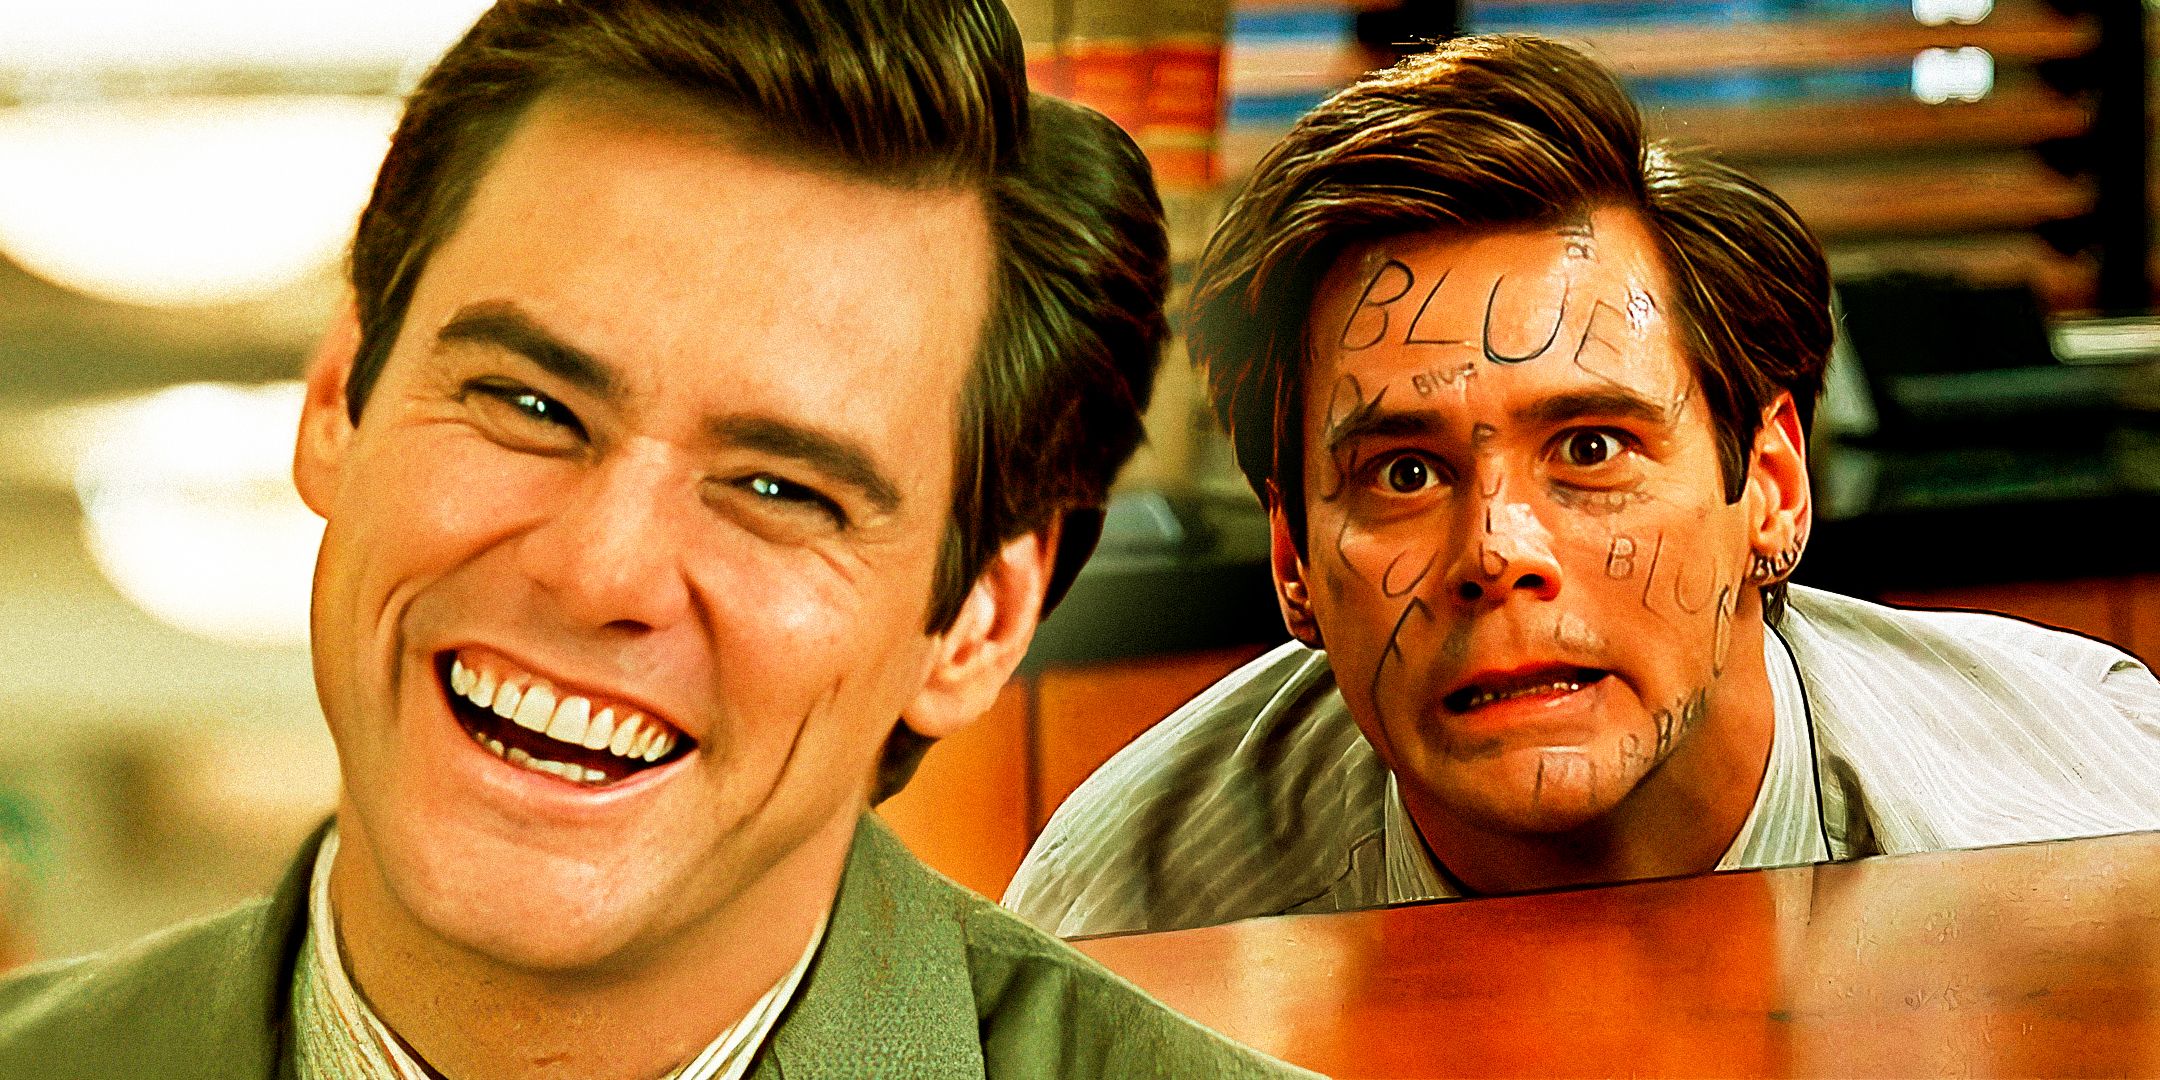 Custom image of Jim Carrey in Liar Liar, smiling and hiding behind a desk. 